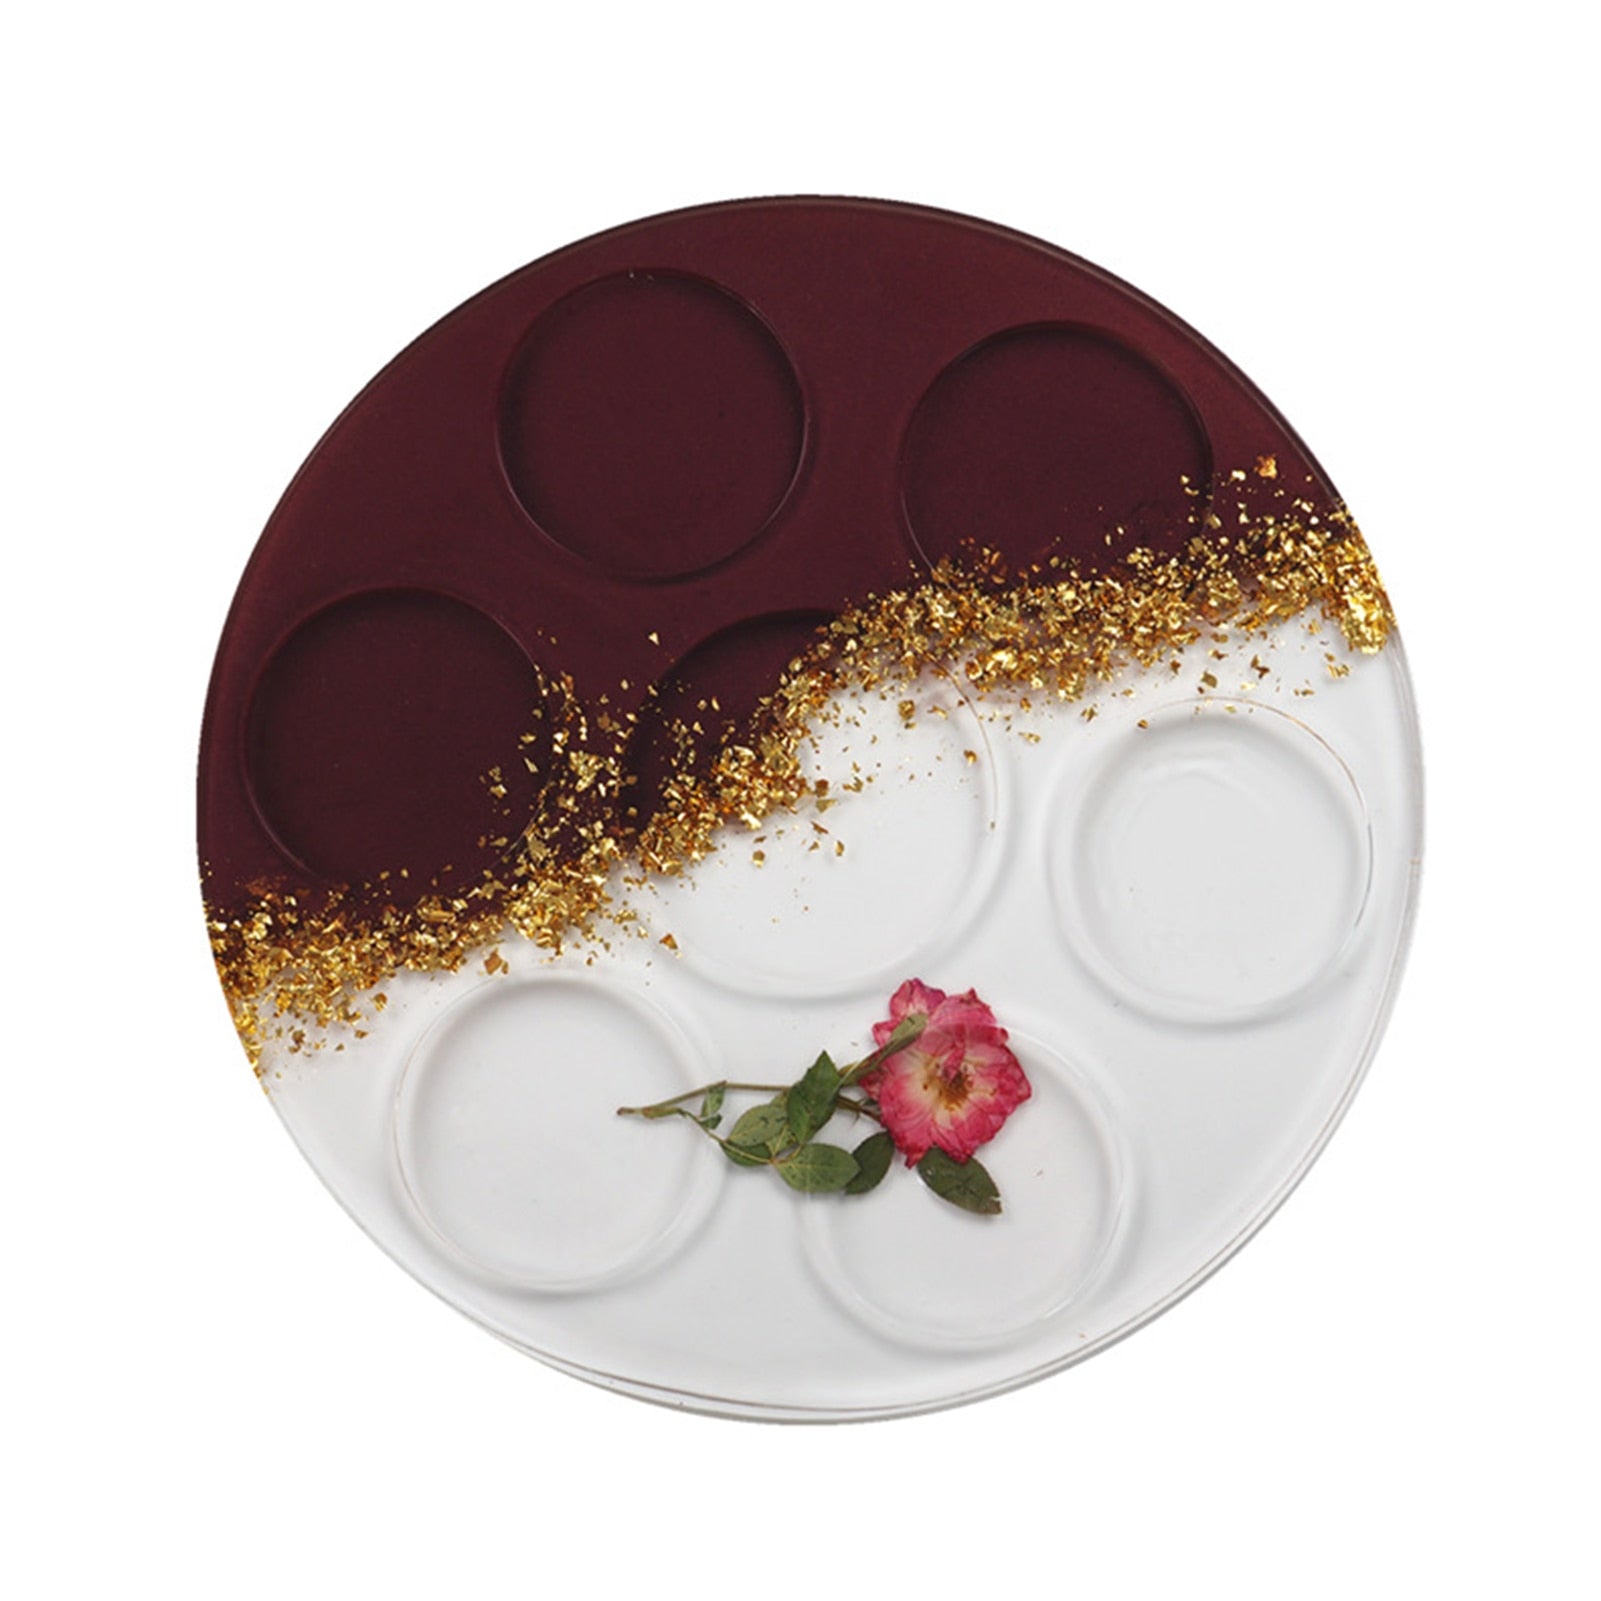 Multi Resin Silicone Mold Glass Holder Tray